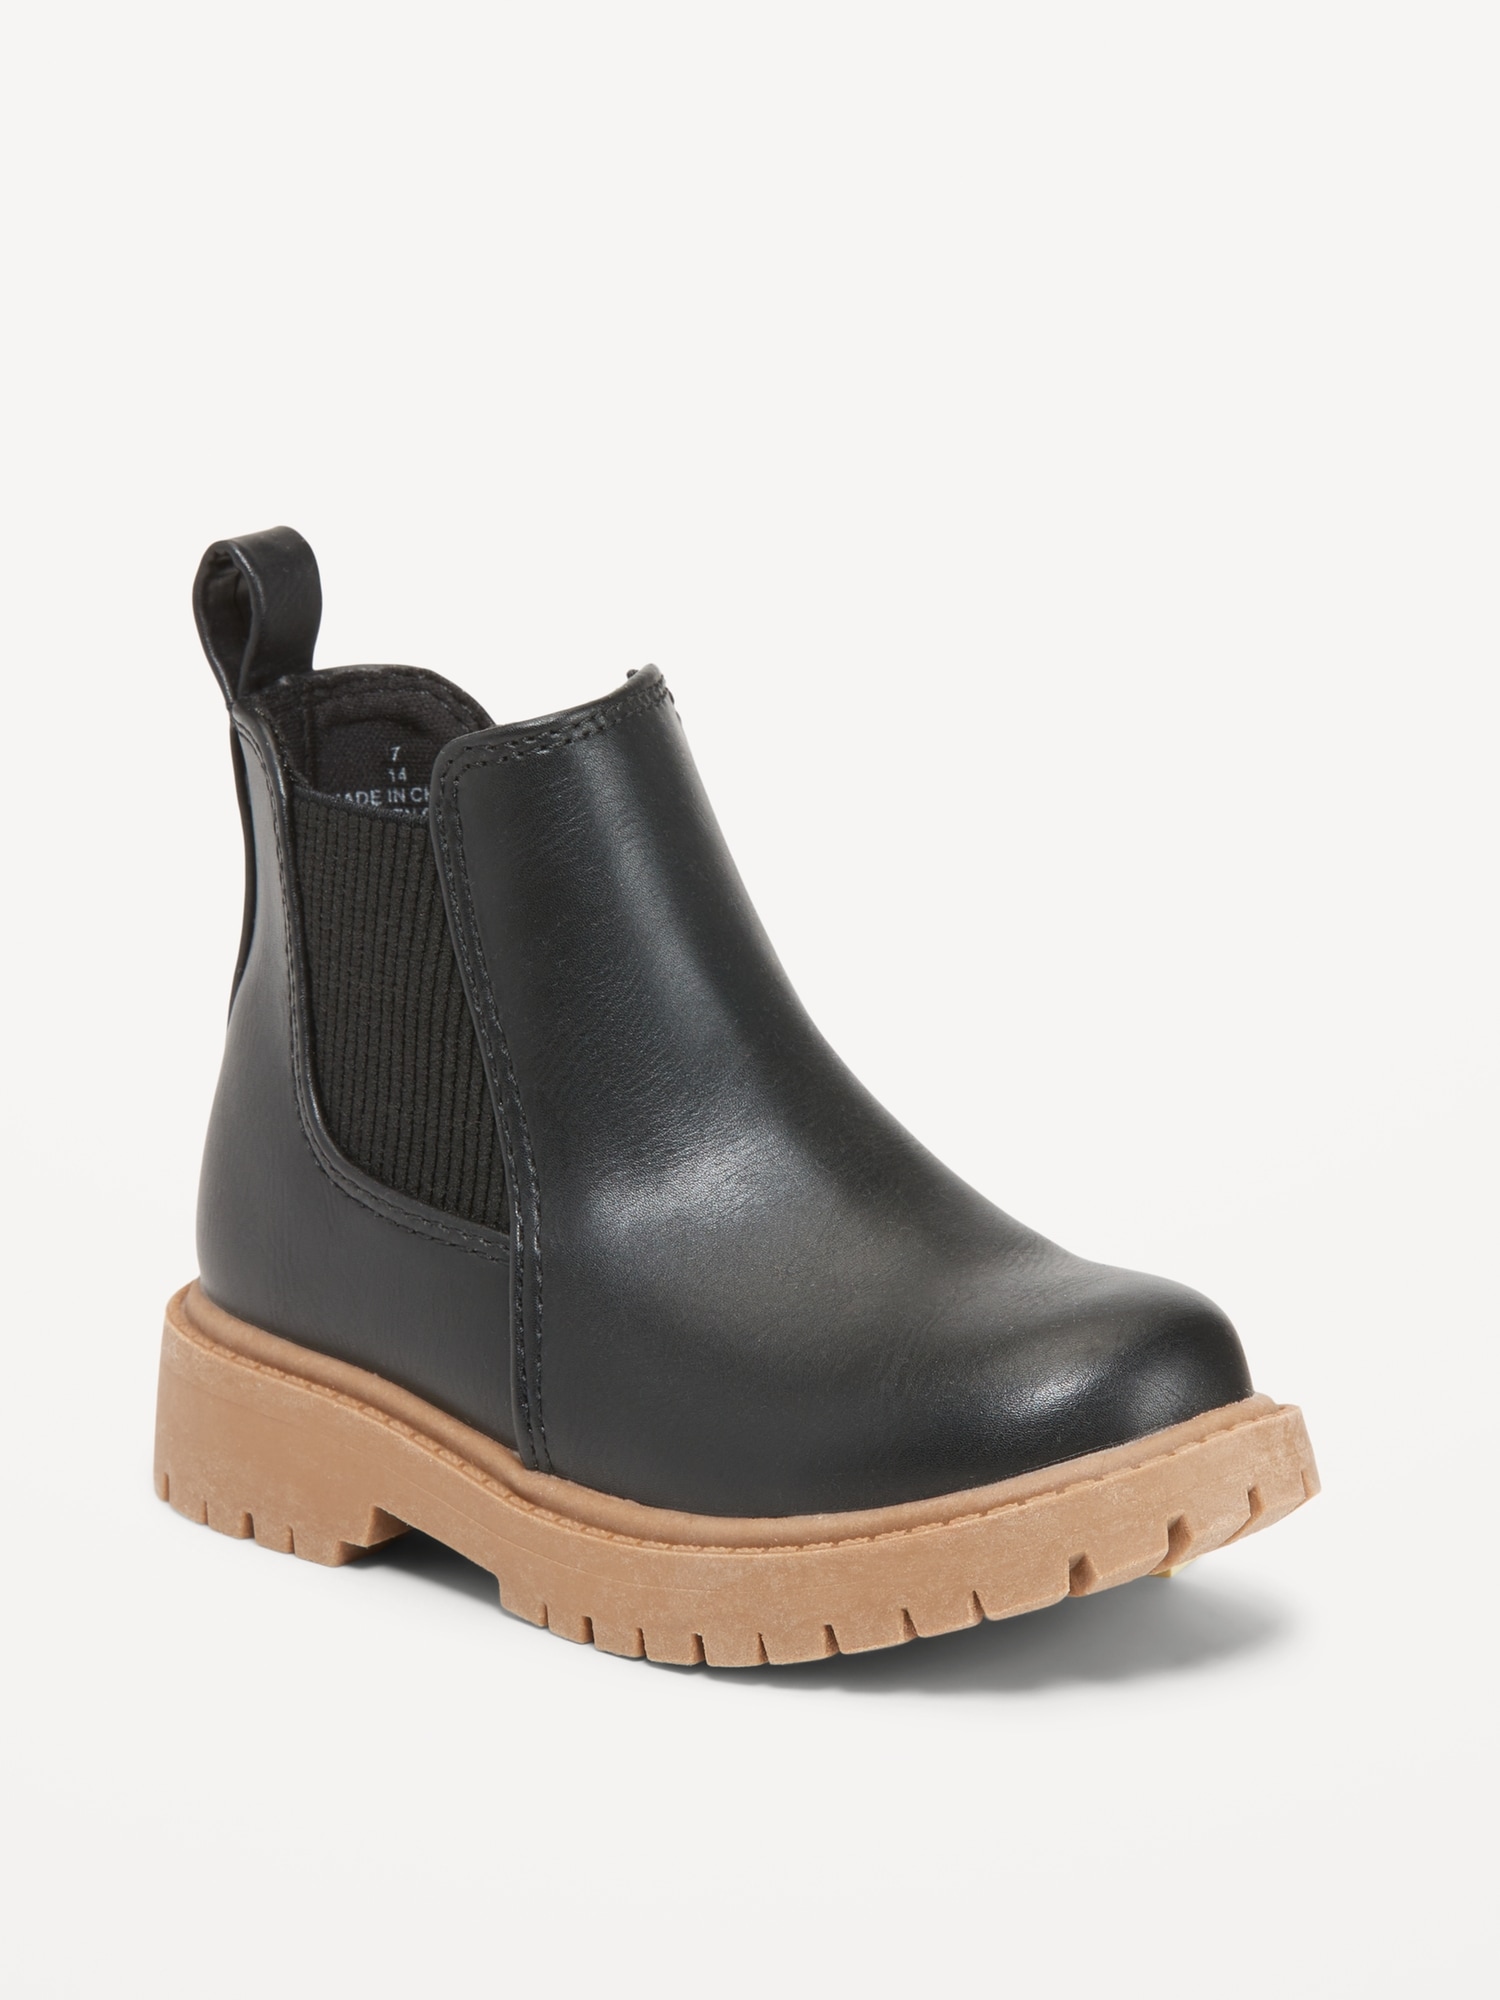 Faux-Leather Chelsea Boots for Toddler Girls